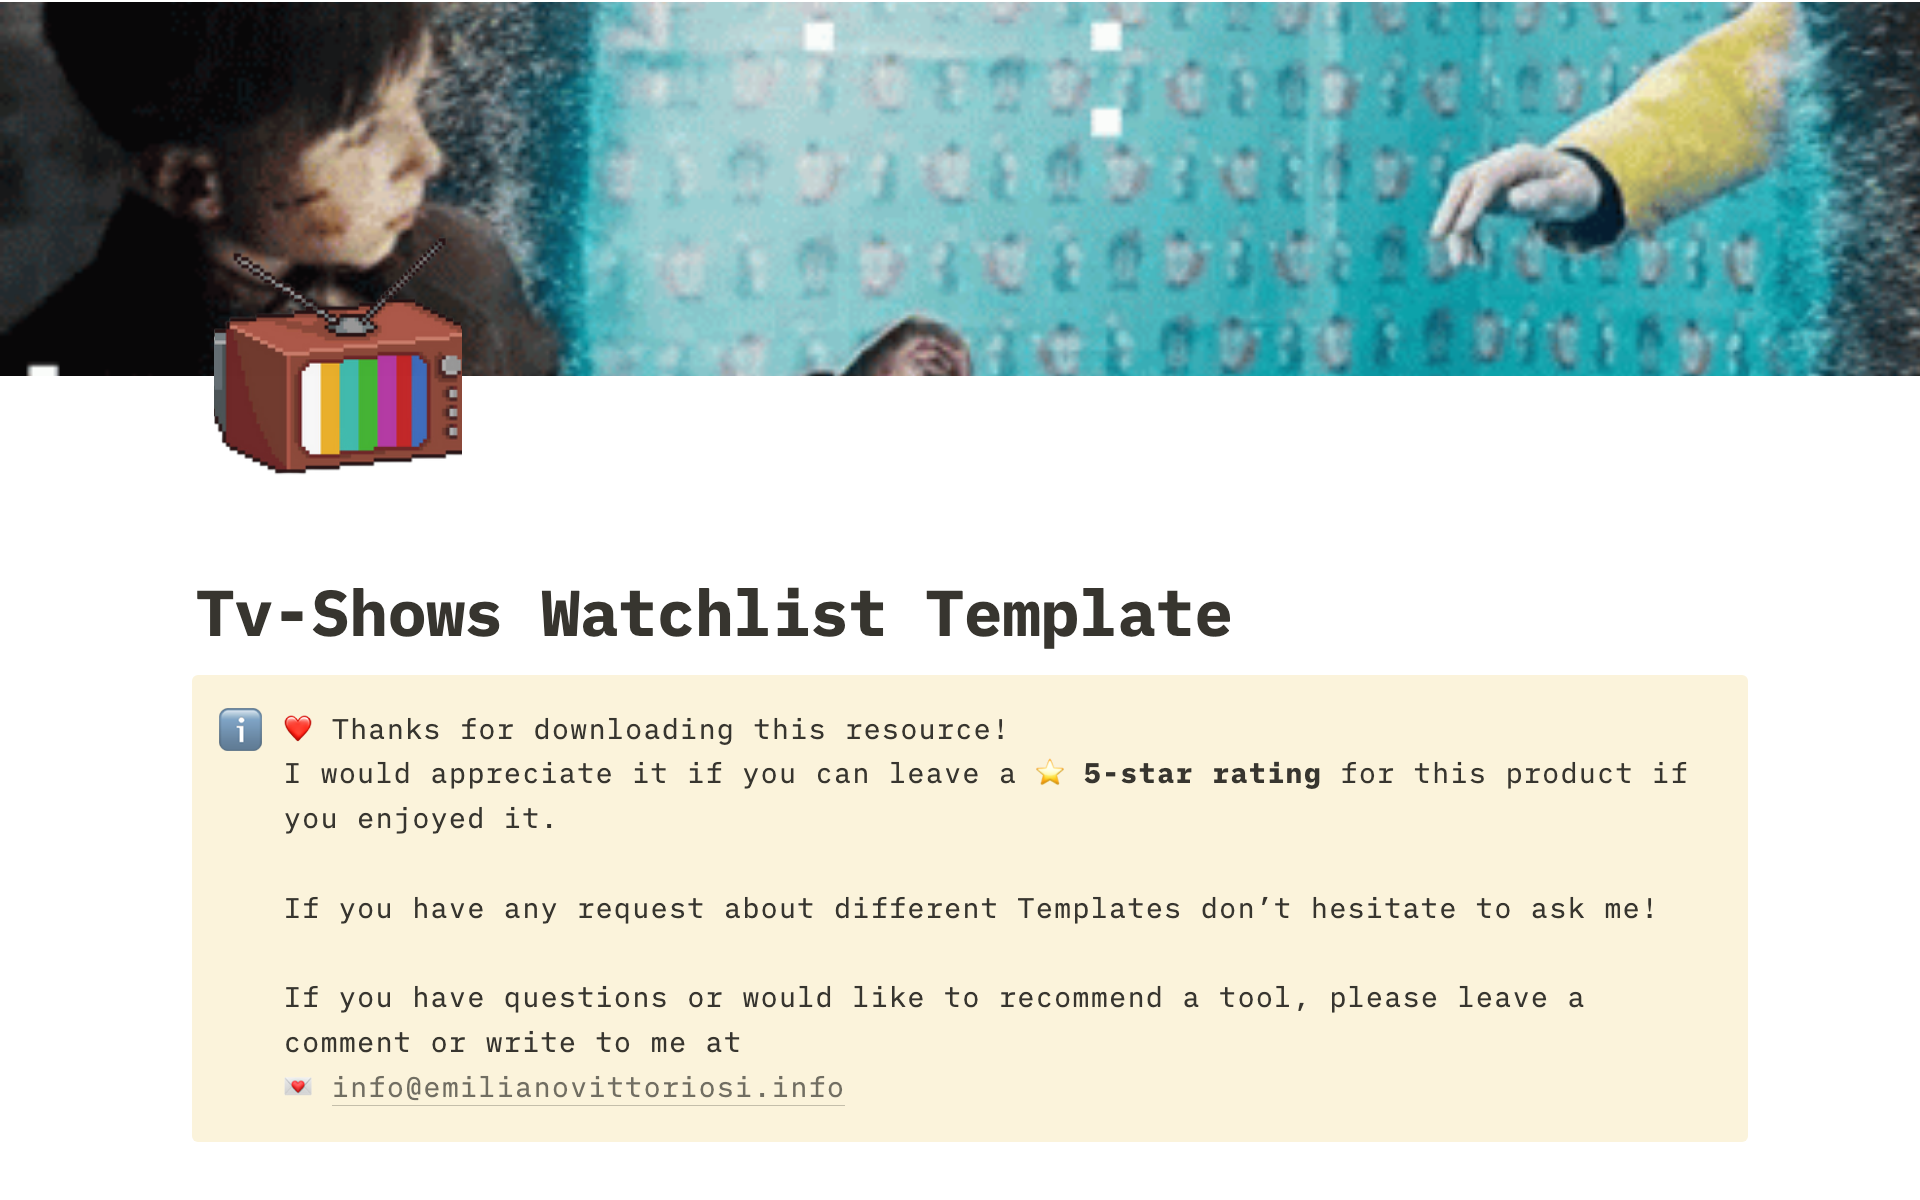 A template preview for Tv-Shows Watchlist